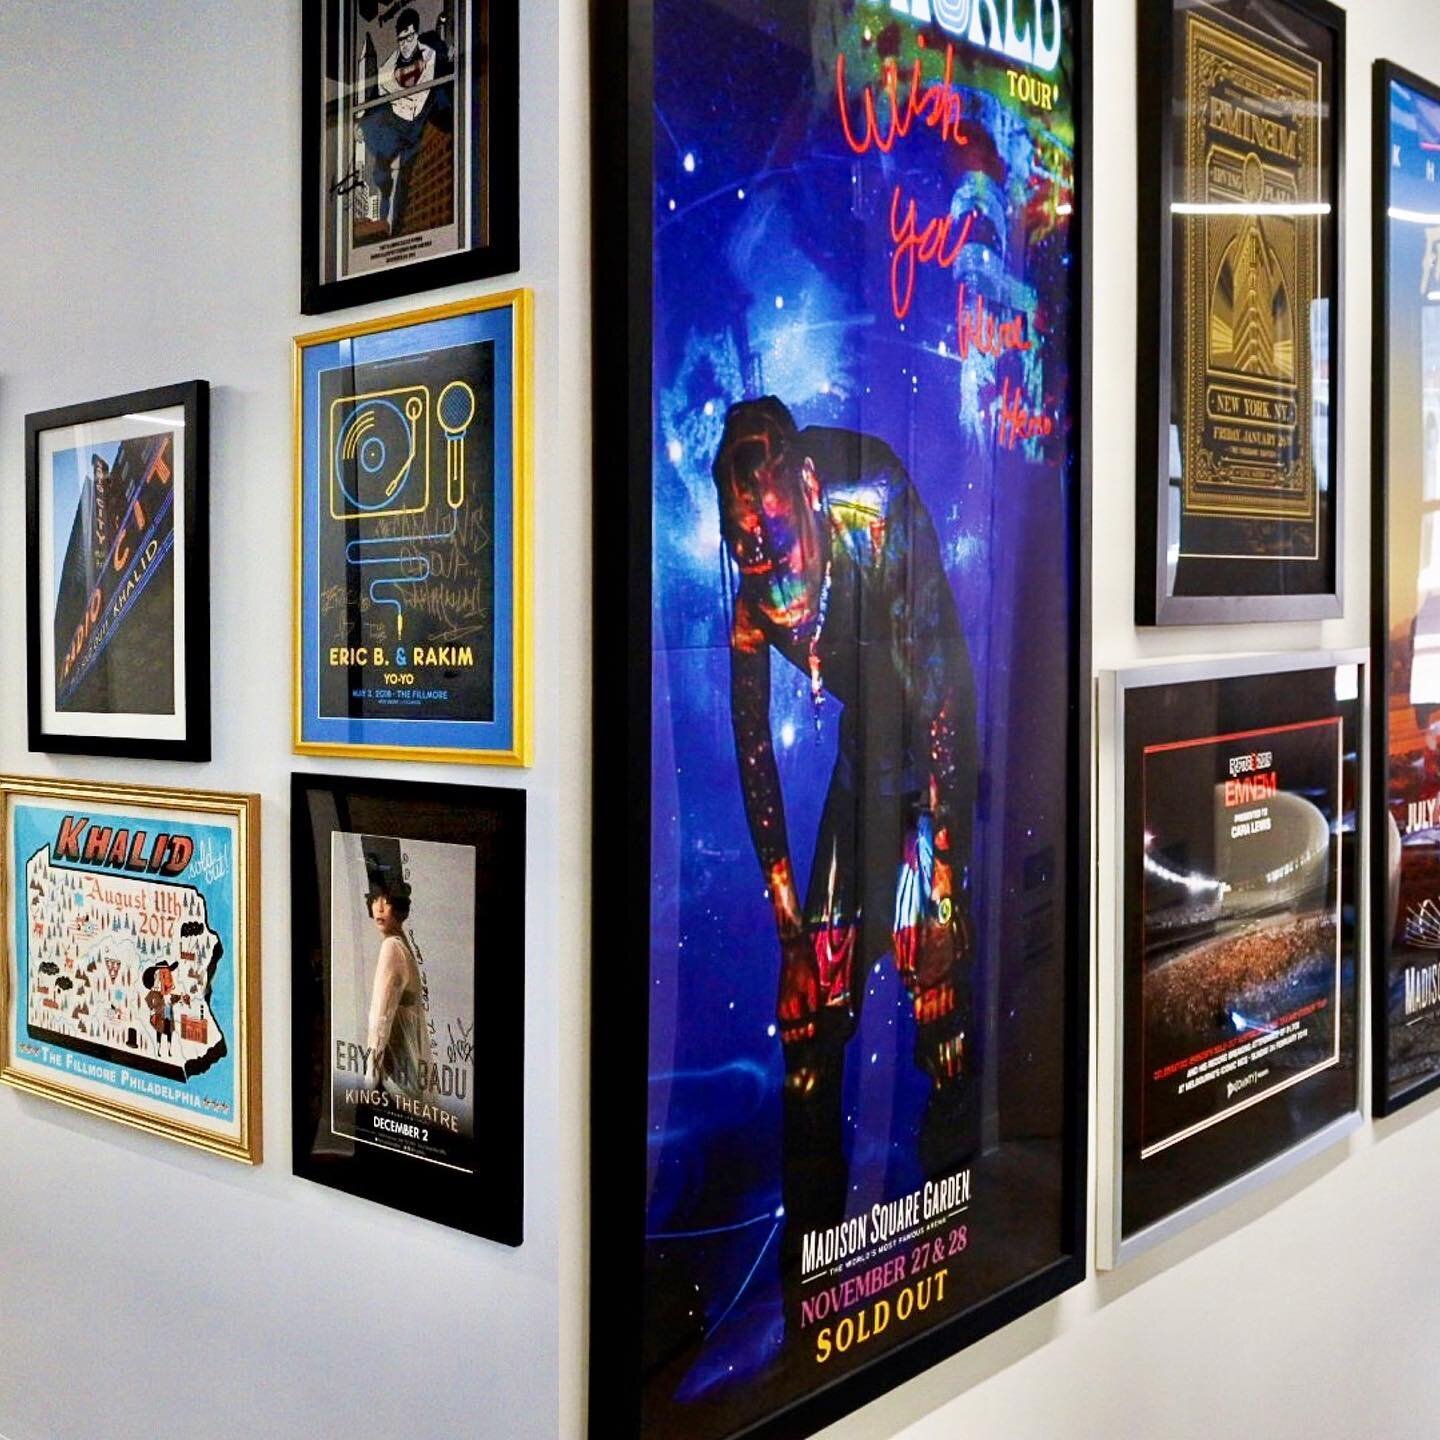 Another Shot from Cara Lewis Group office @clewisgroup. Gallery walls showcase so much talent we ran out of space installing it. #caralewisgroup #officedesign #gallerywall #officedecor #gallery #graphicdesign #commercialdesign 
.
.
.
#musicmogul #tra